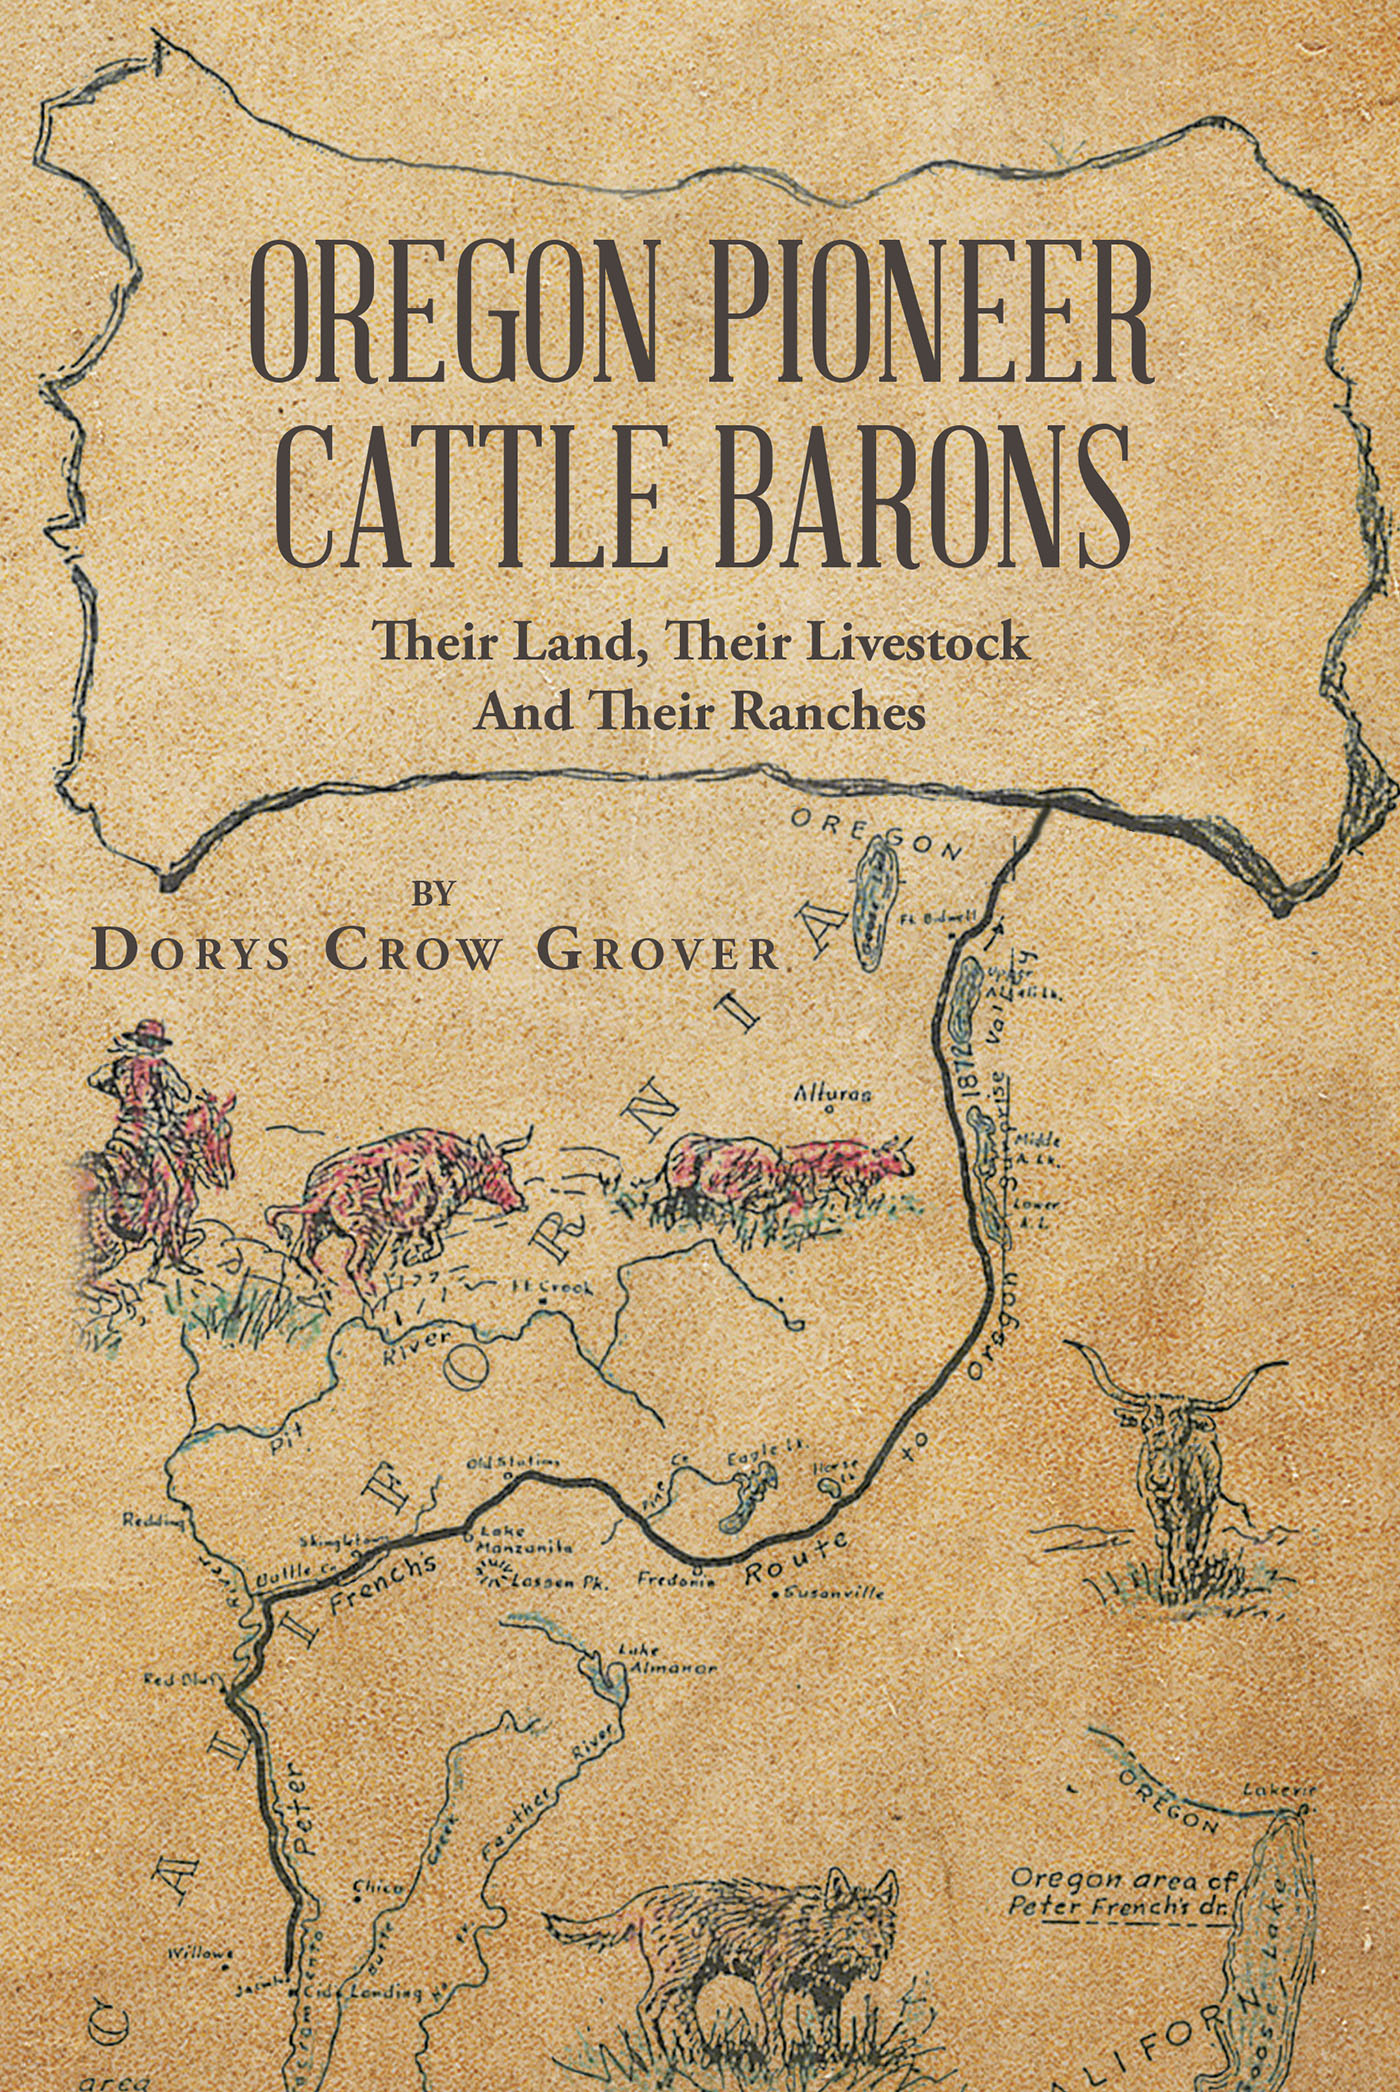 Oregon Pioneer Cattle Barons Cover Image